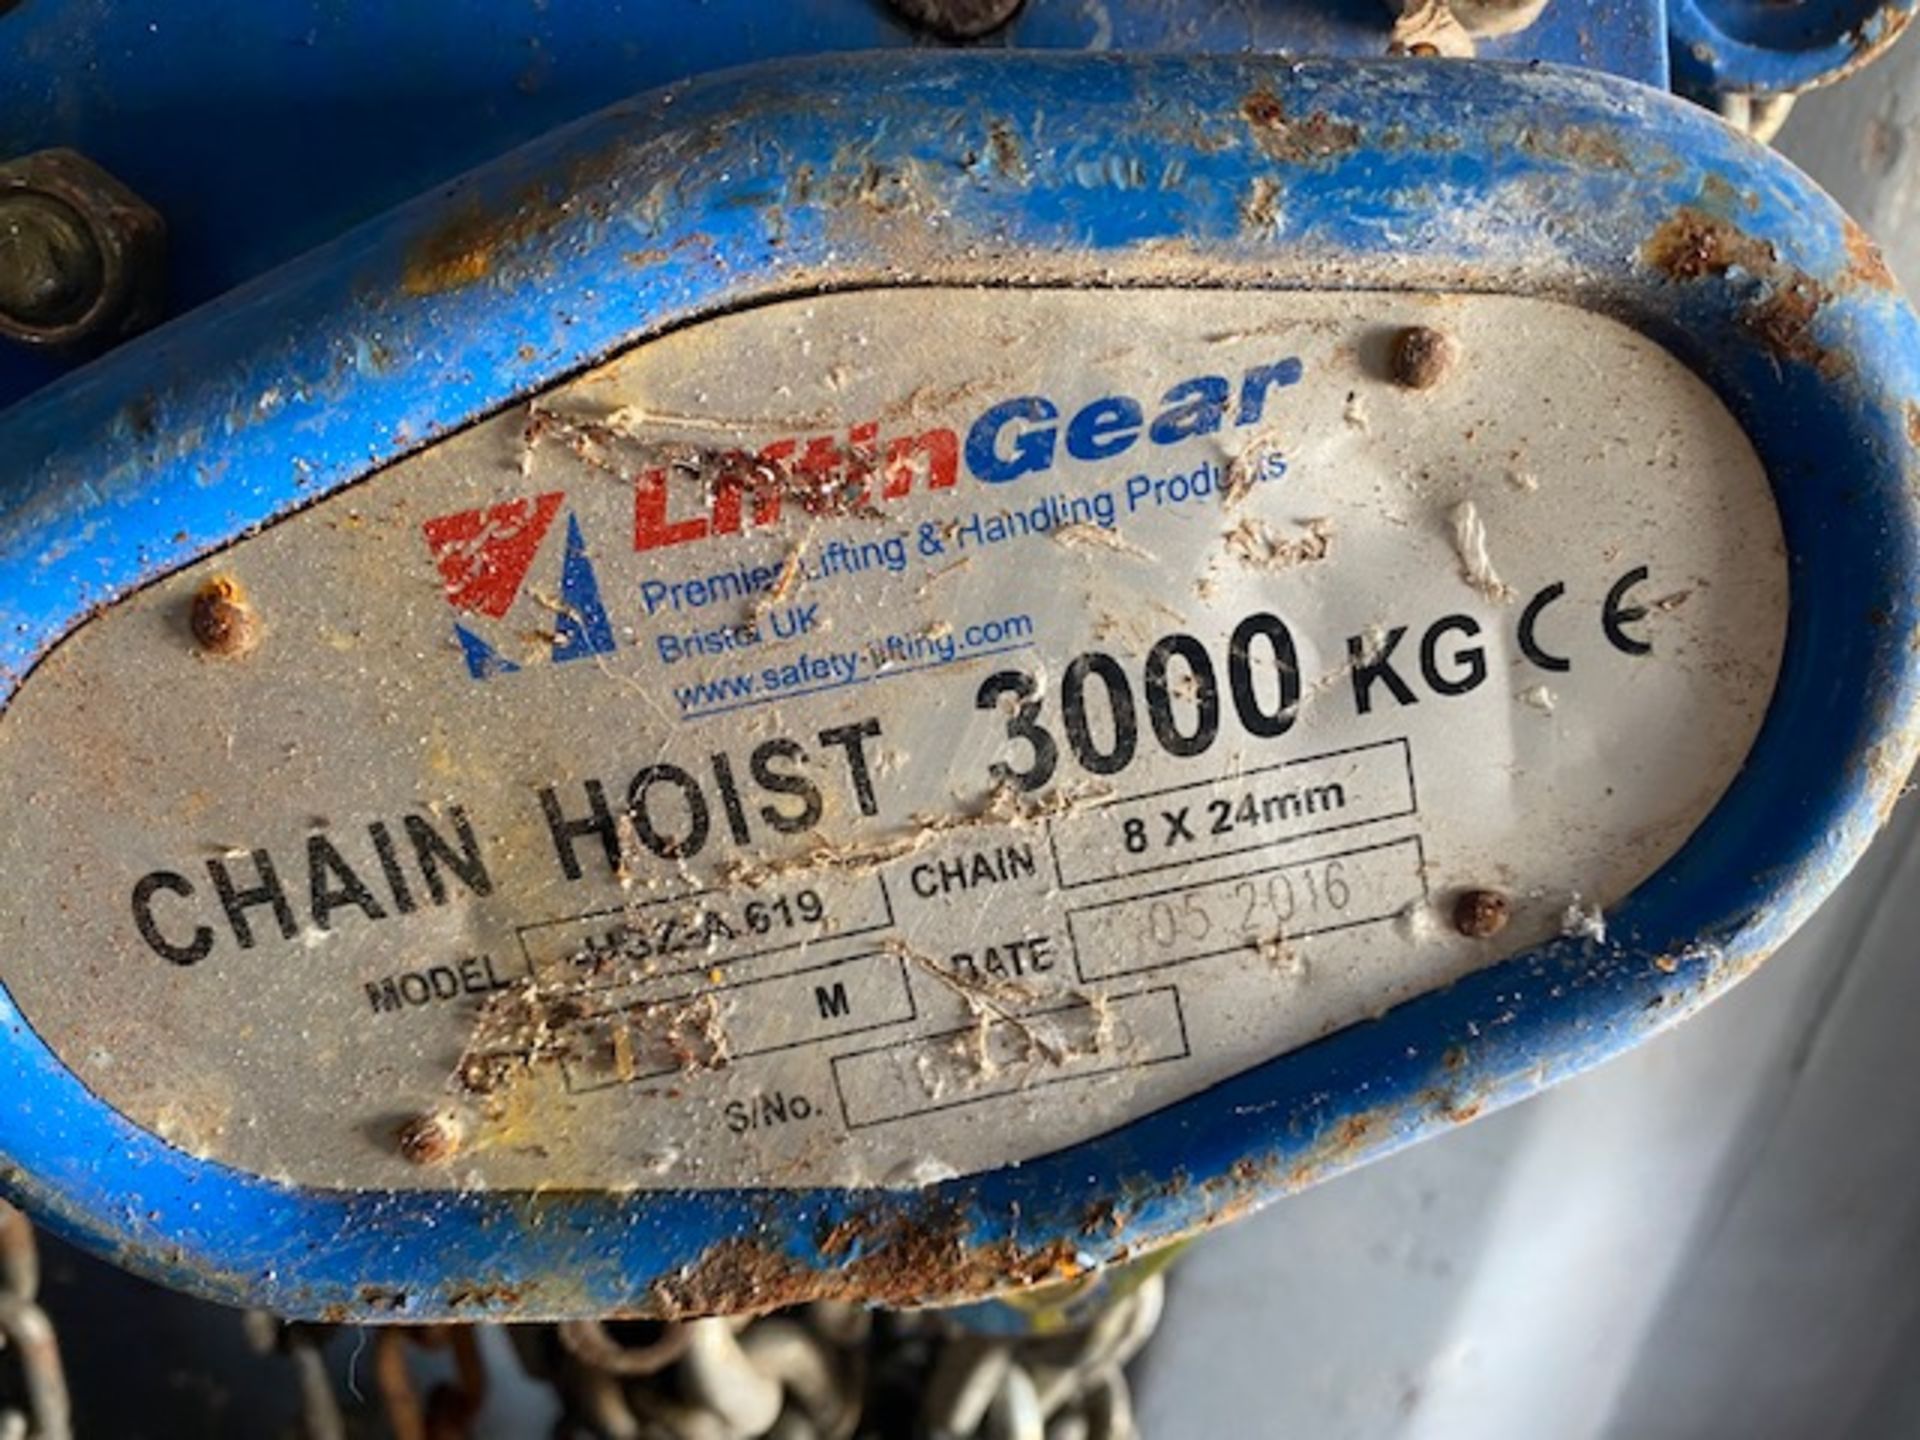 Three Lifting Gear 3000Kg chain hoists model HSZ-A619. *N.B. This lot has no record of Thorough - Image 2 of 2